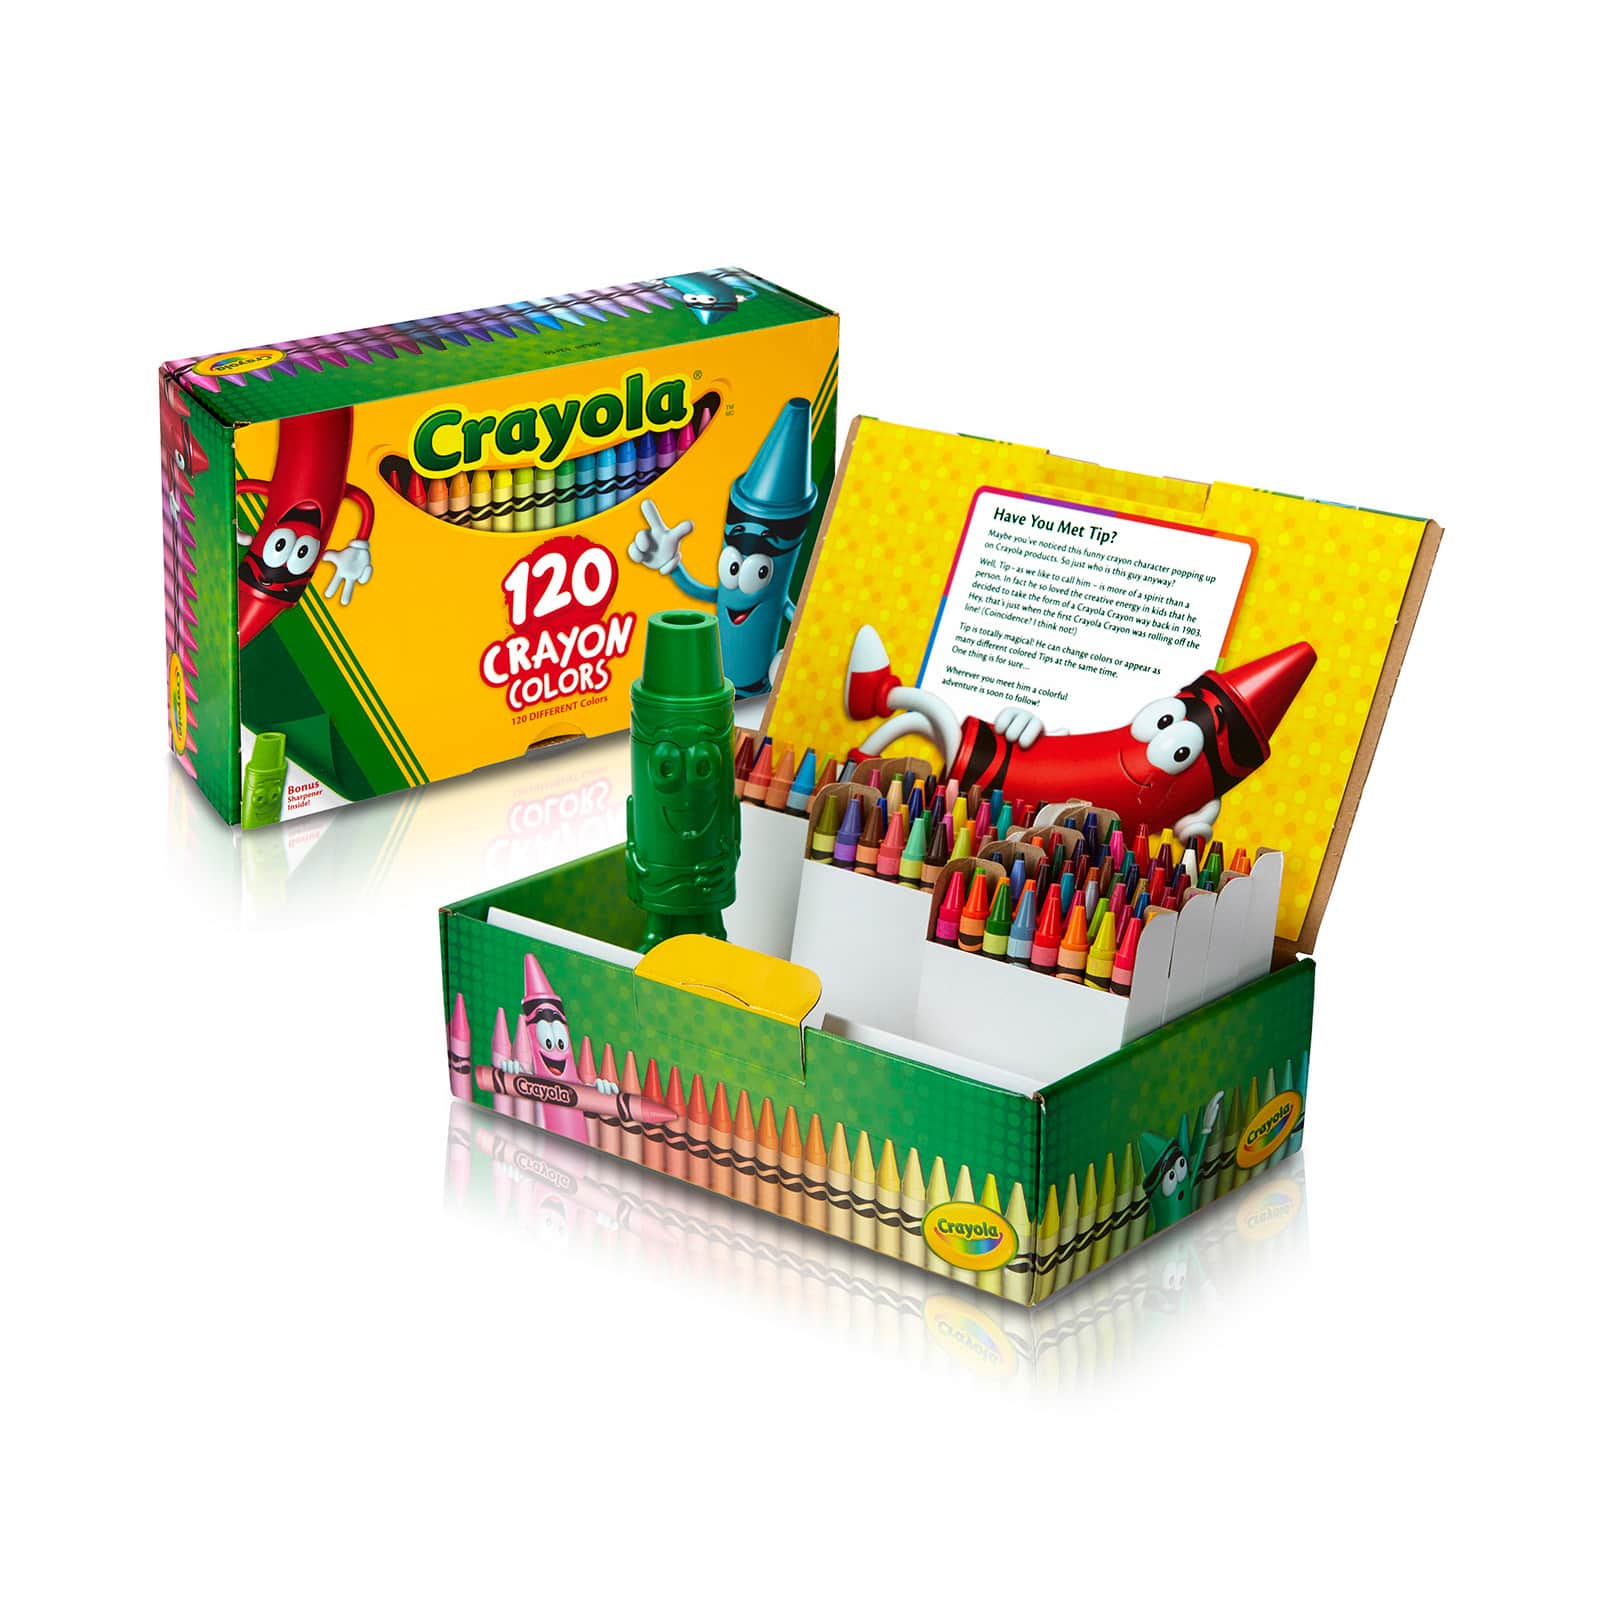  Crayola Classic Color Crayons in Flip-Top Pack with